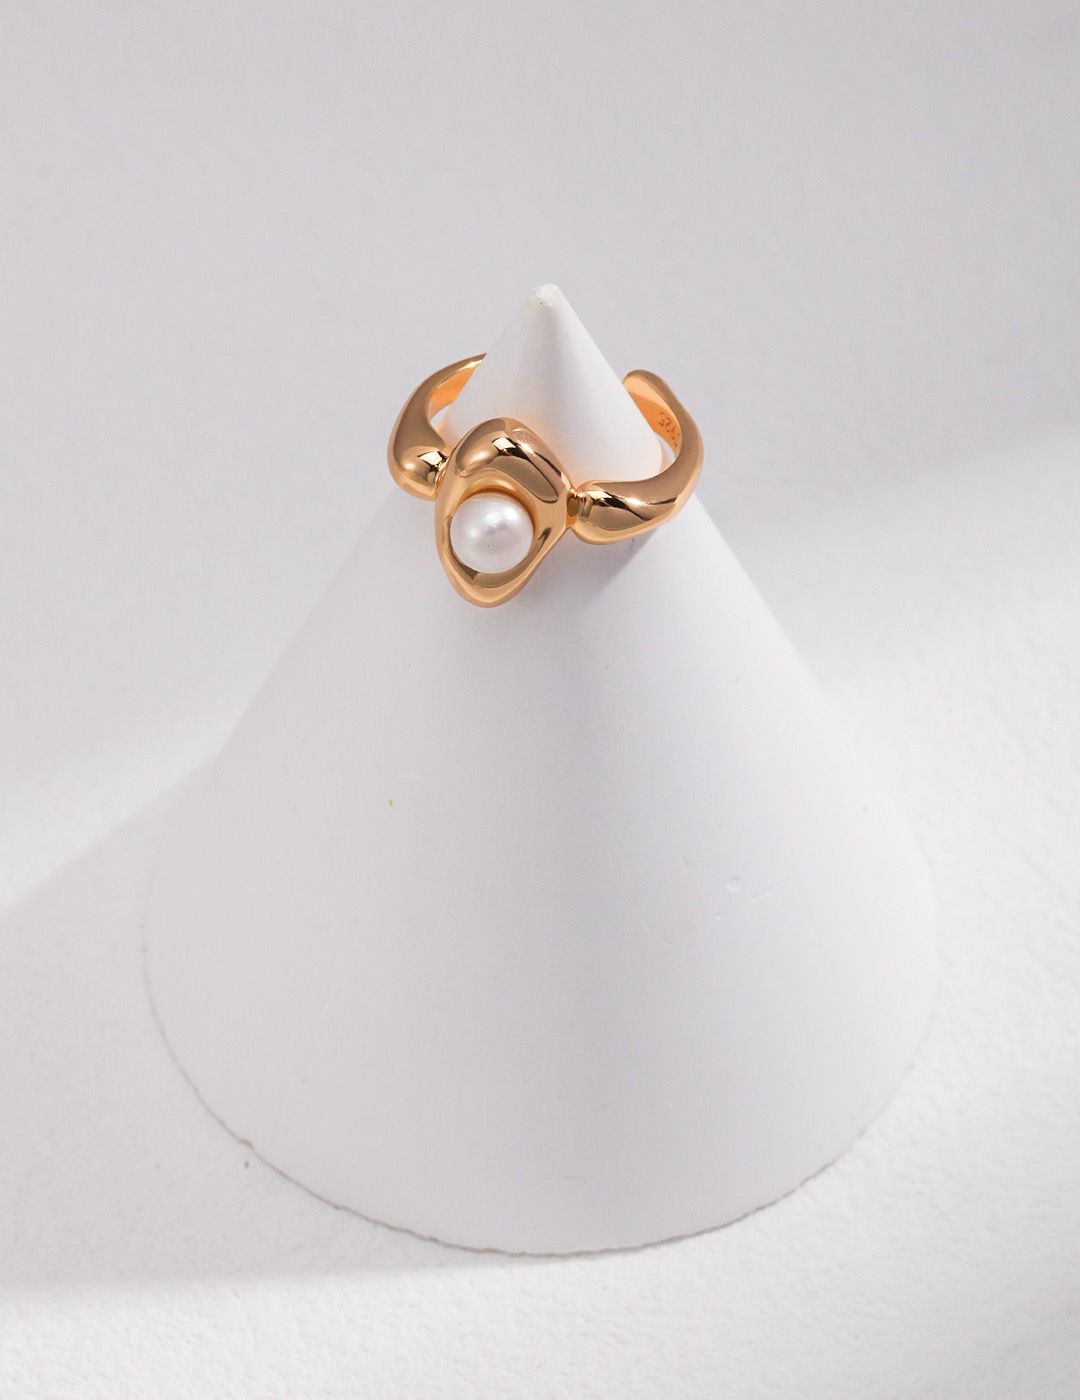 Pearl Elegance Ring with Lustrous Freshwater Pearl and Delicate Surrounding Accents